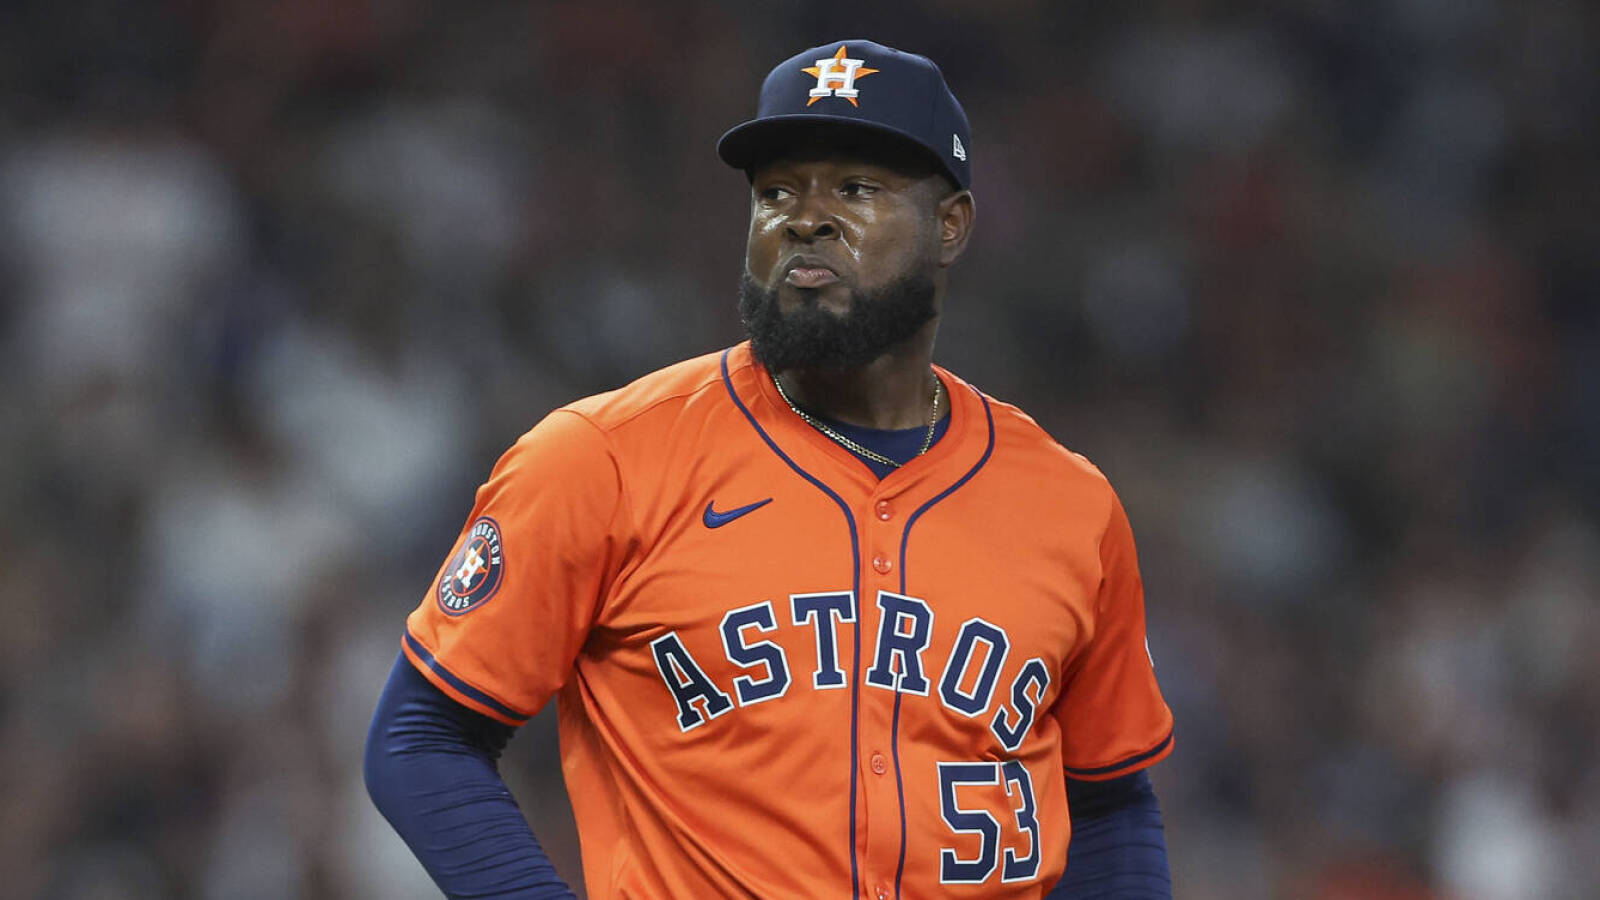 Astros lose another starting pitcher to injury